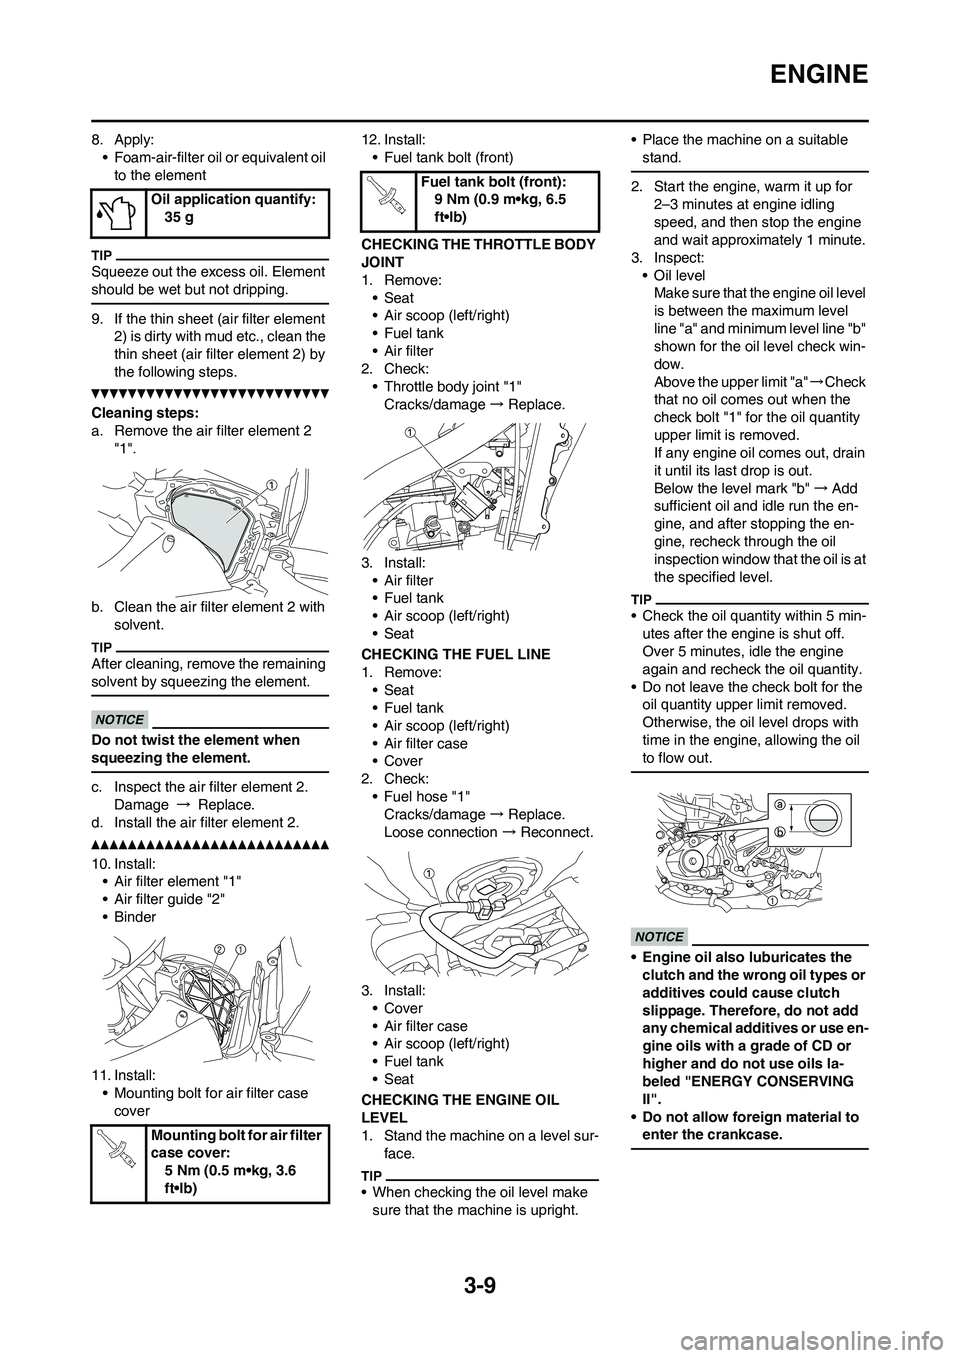 YAMAHA YZ450F 2010  Owners Manual 
3-9
ENGINE
8. Apply:• Foam-air-filter oil or equivalent oil to the element
Squeeze out the excess oil. Element 
should be wet but not dripping.
9. If the thin sheet (air filter element  2) is dirty